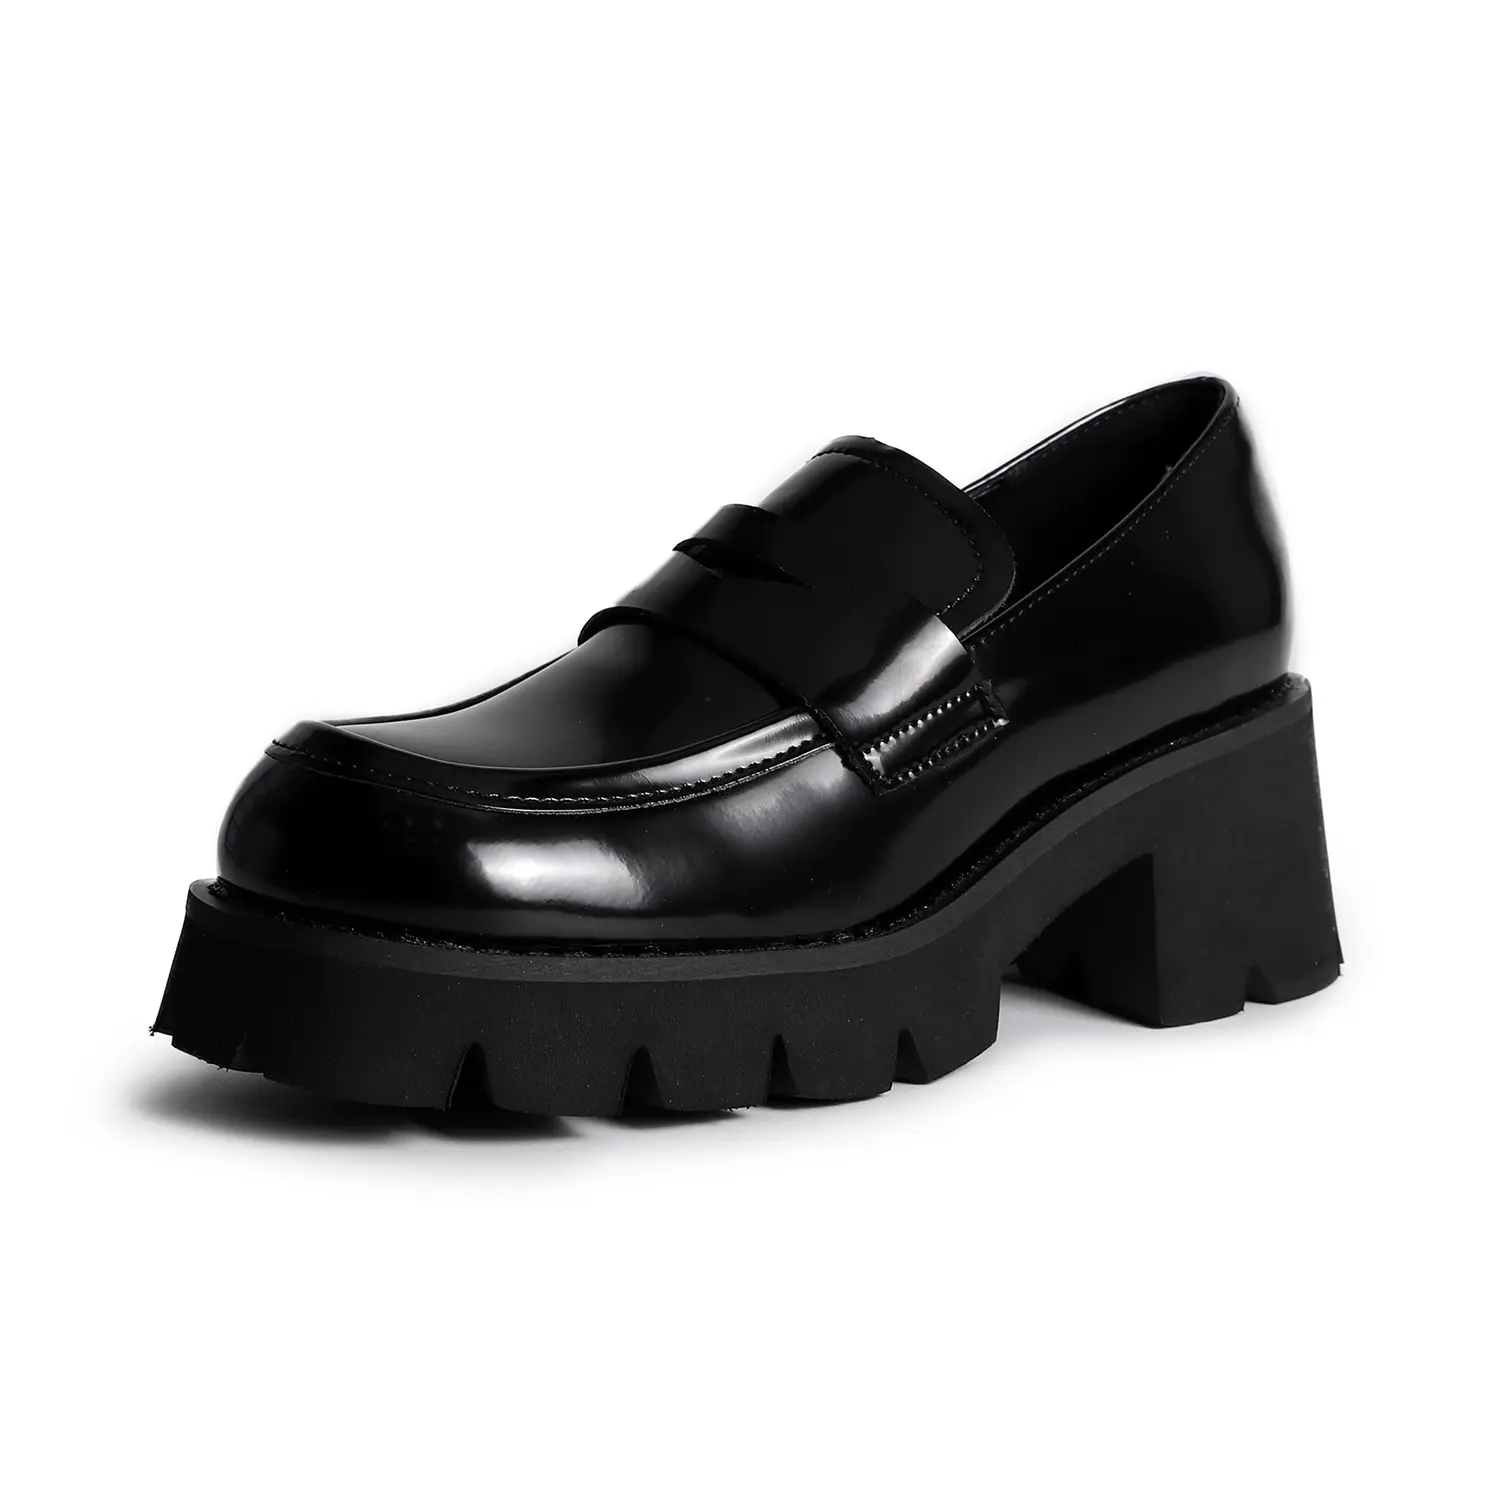 Ubililia Solid Black Round Toe with Rhinestone strap Loafer shoes Thick Heels Chunky Platform Breathable Soft Sole Women Loafers